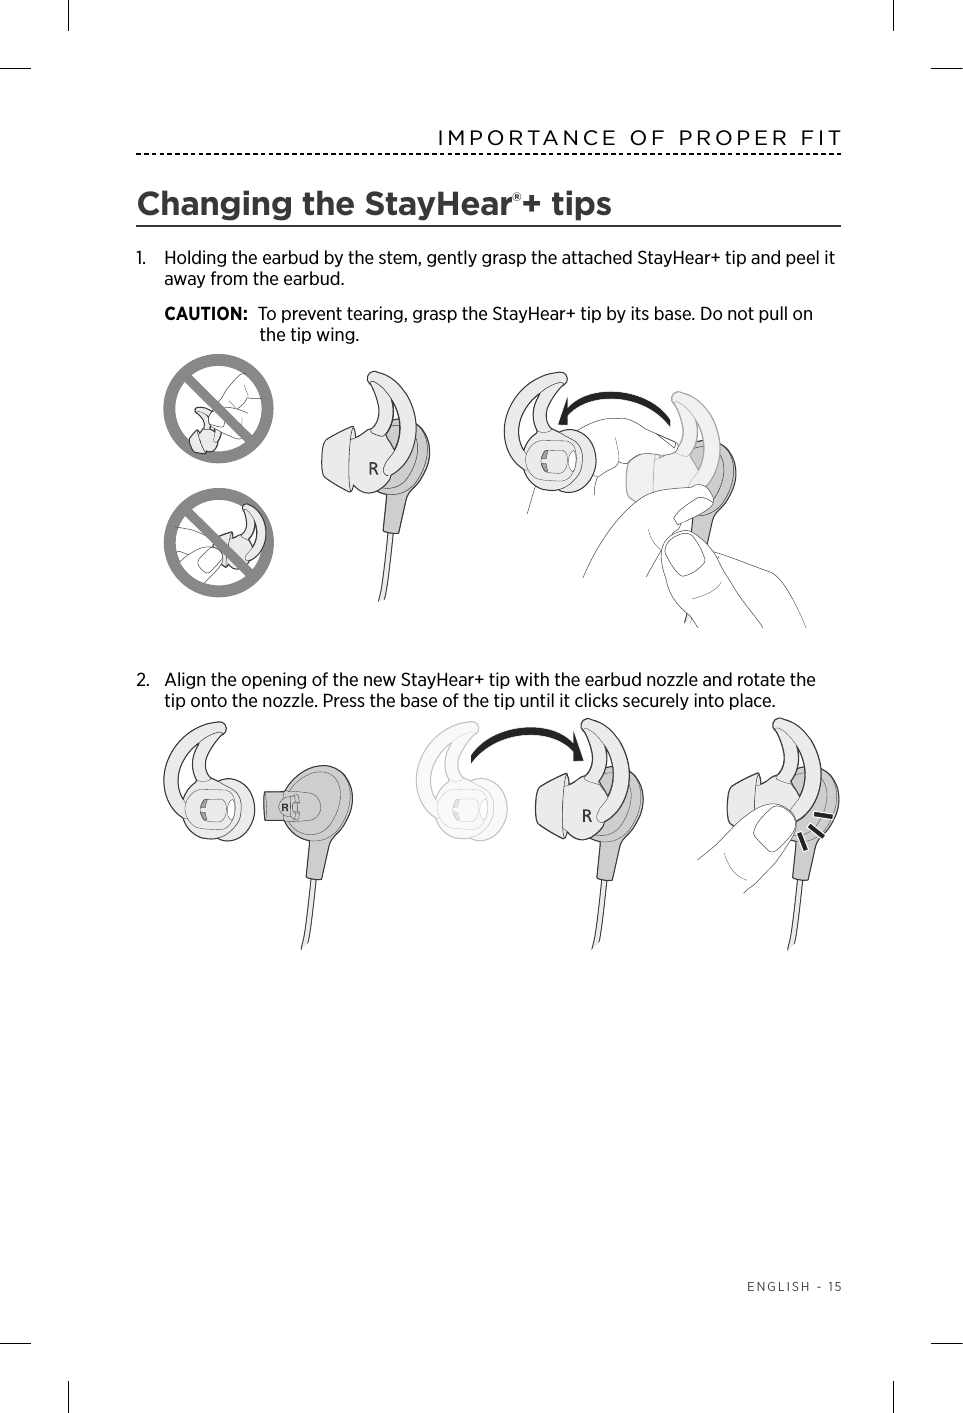  ENGLISH - 15IMPORTANCE OF PROPER FITChanging the StayHear®+ tips1.   Holding the earbud by the stem, gently grasp the attached  StayHear+ tip and peel it away from the earbud. CAUTION: To prevent tearing, grasp the StayHear+ tip by its base. Do not pull on the tip wing.2.  Align the opening of the new StayHear+ tip with the earbud nozzle and rotate the tip onto the nozzle. Press the base of the tip until it clicks securely into place.